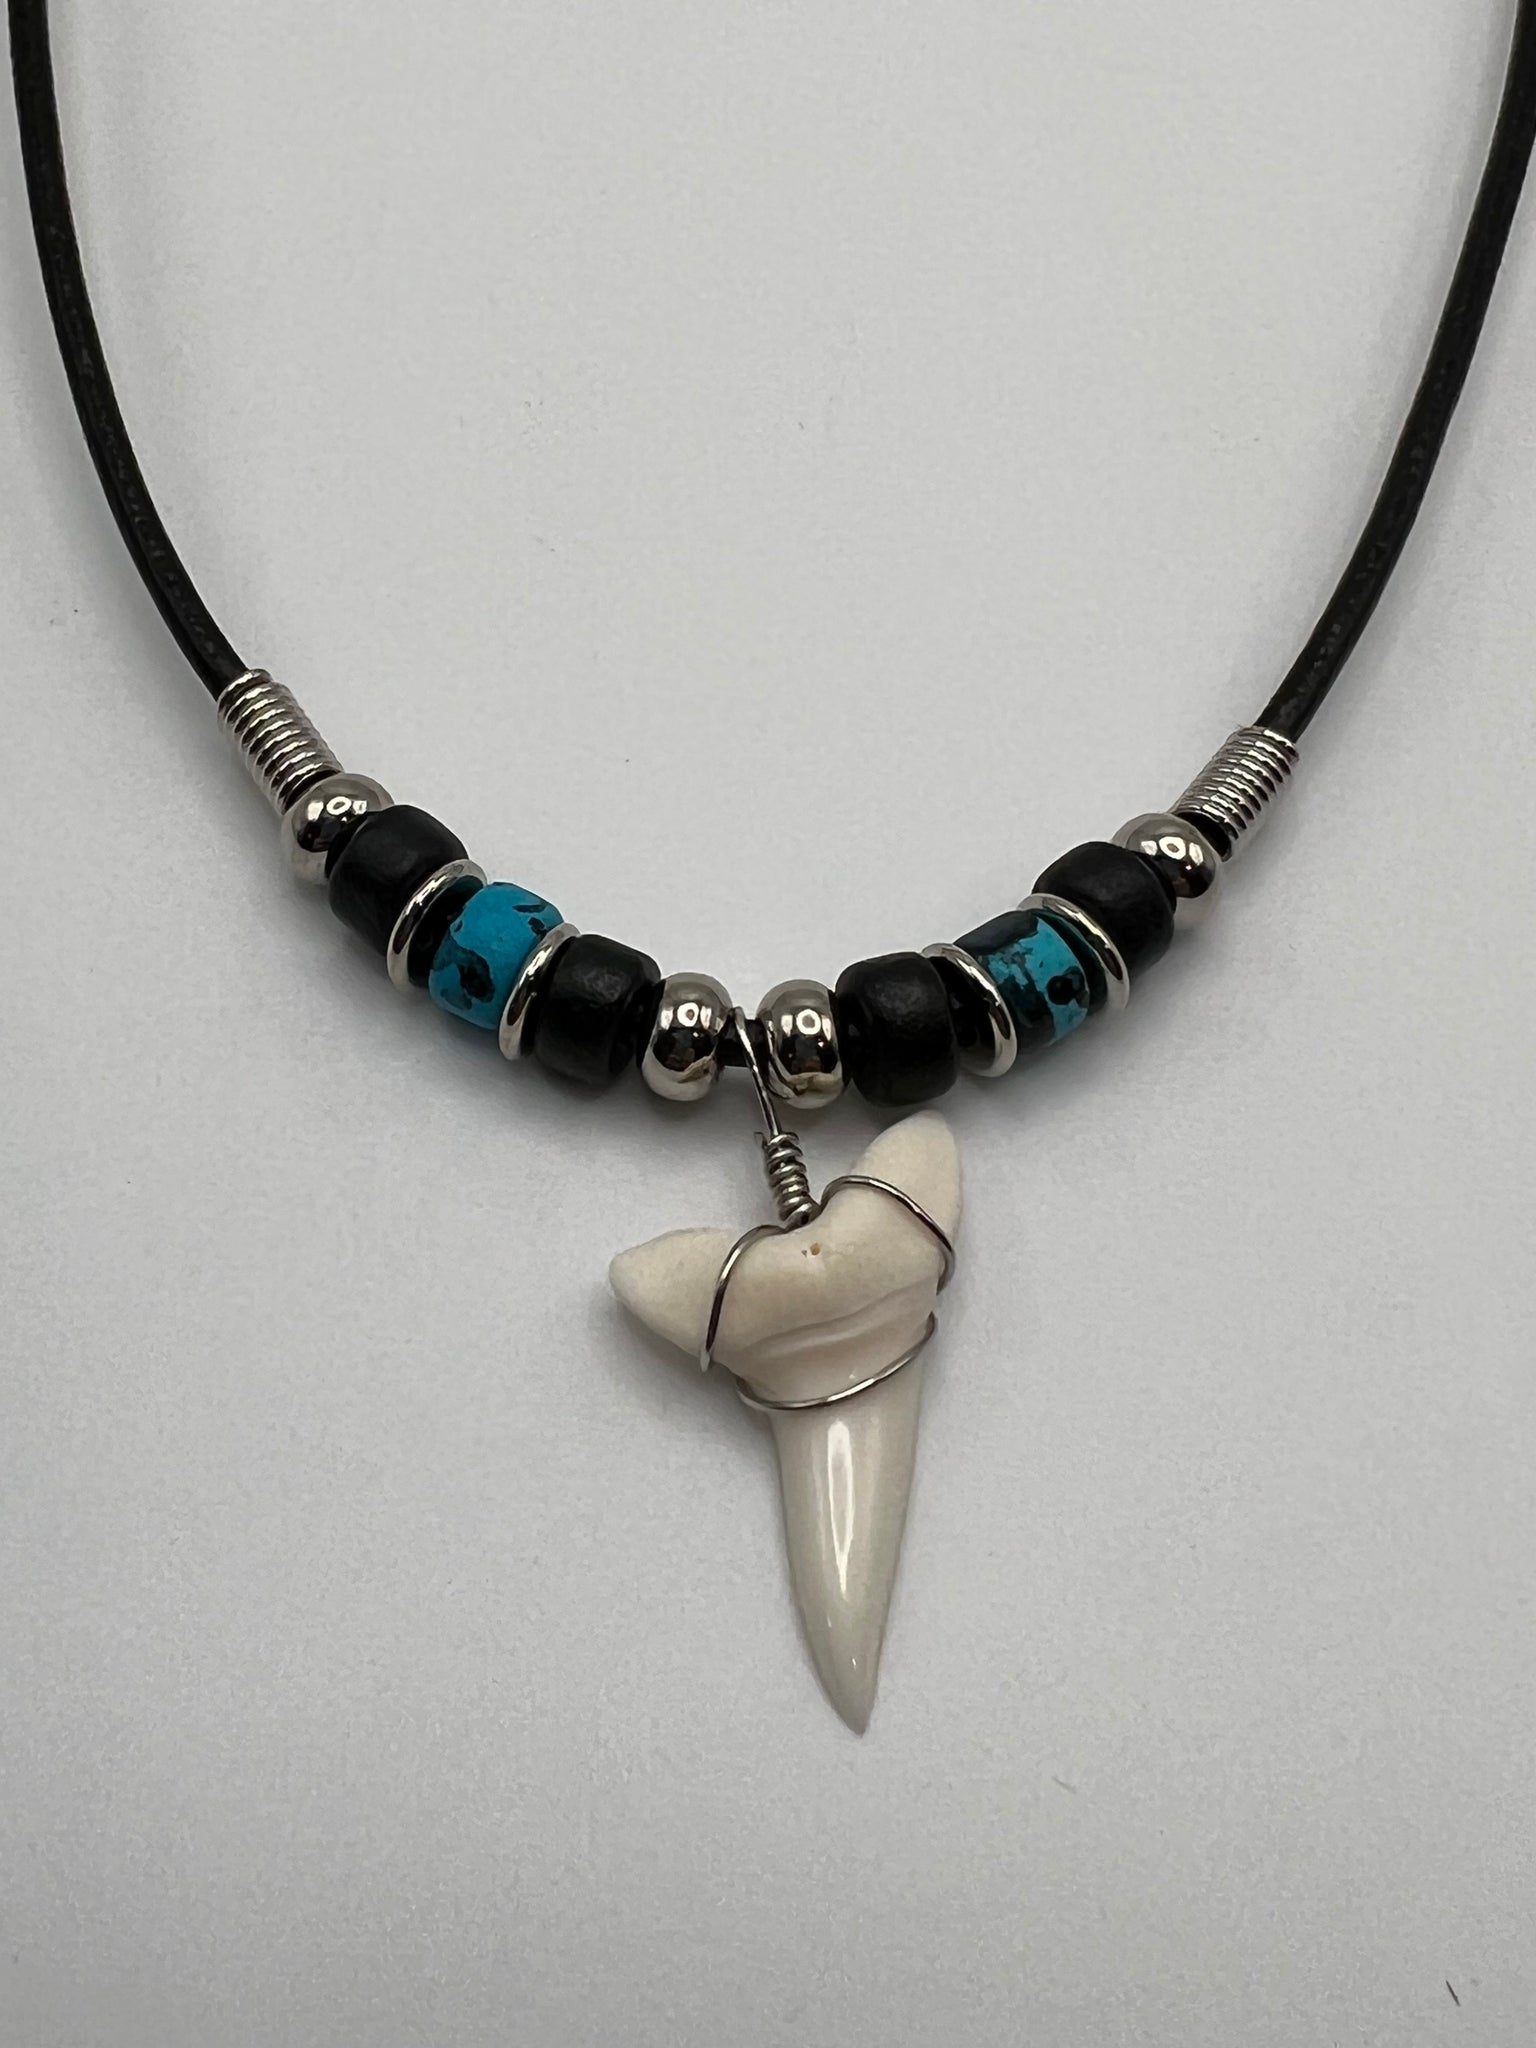 White Mako Shark Tooth Necklace Blue and Black Speckled Beads – Real ...